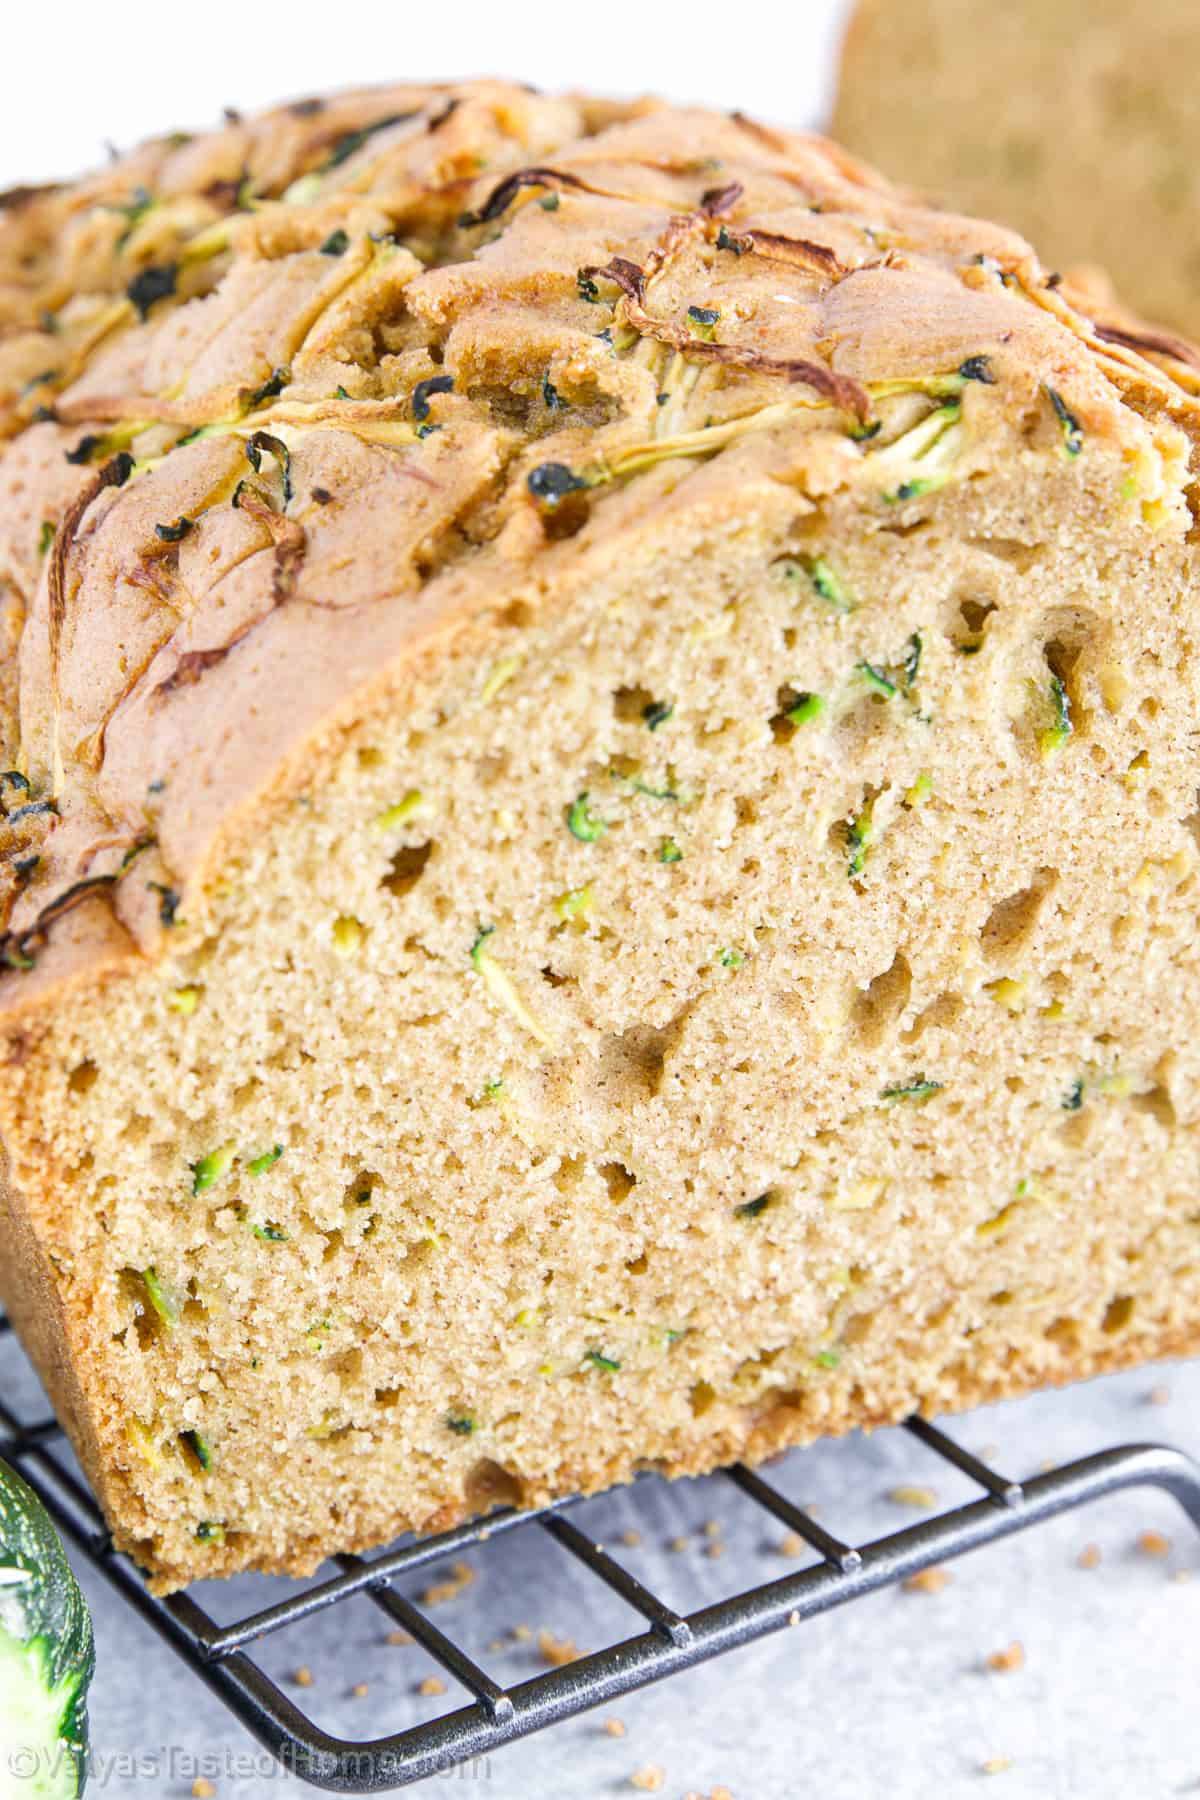 This Zucchini Bread is deliciously moist and flavorful and combines the natural goodness of zucchini with a hint of warm spices like cinnamon. Plus, it's easy!